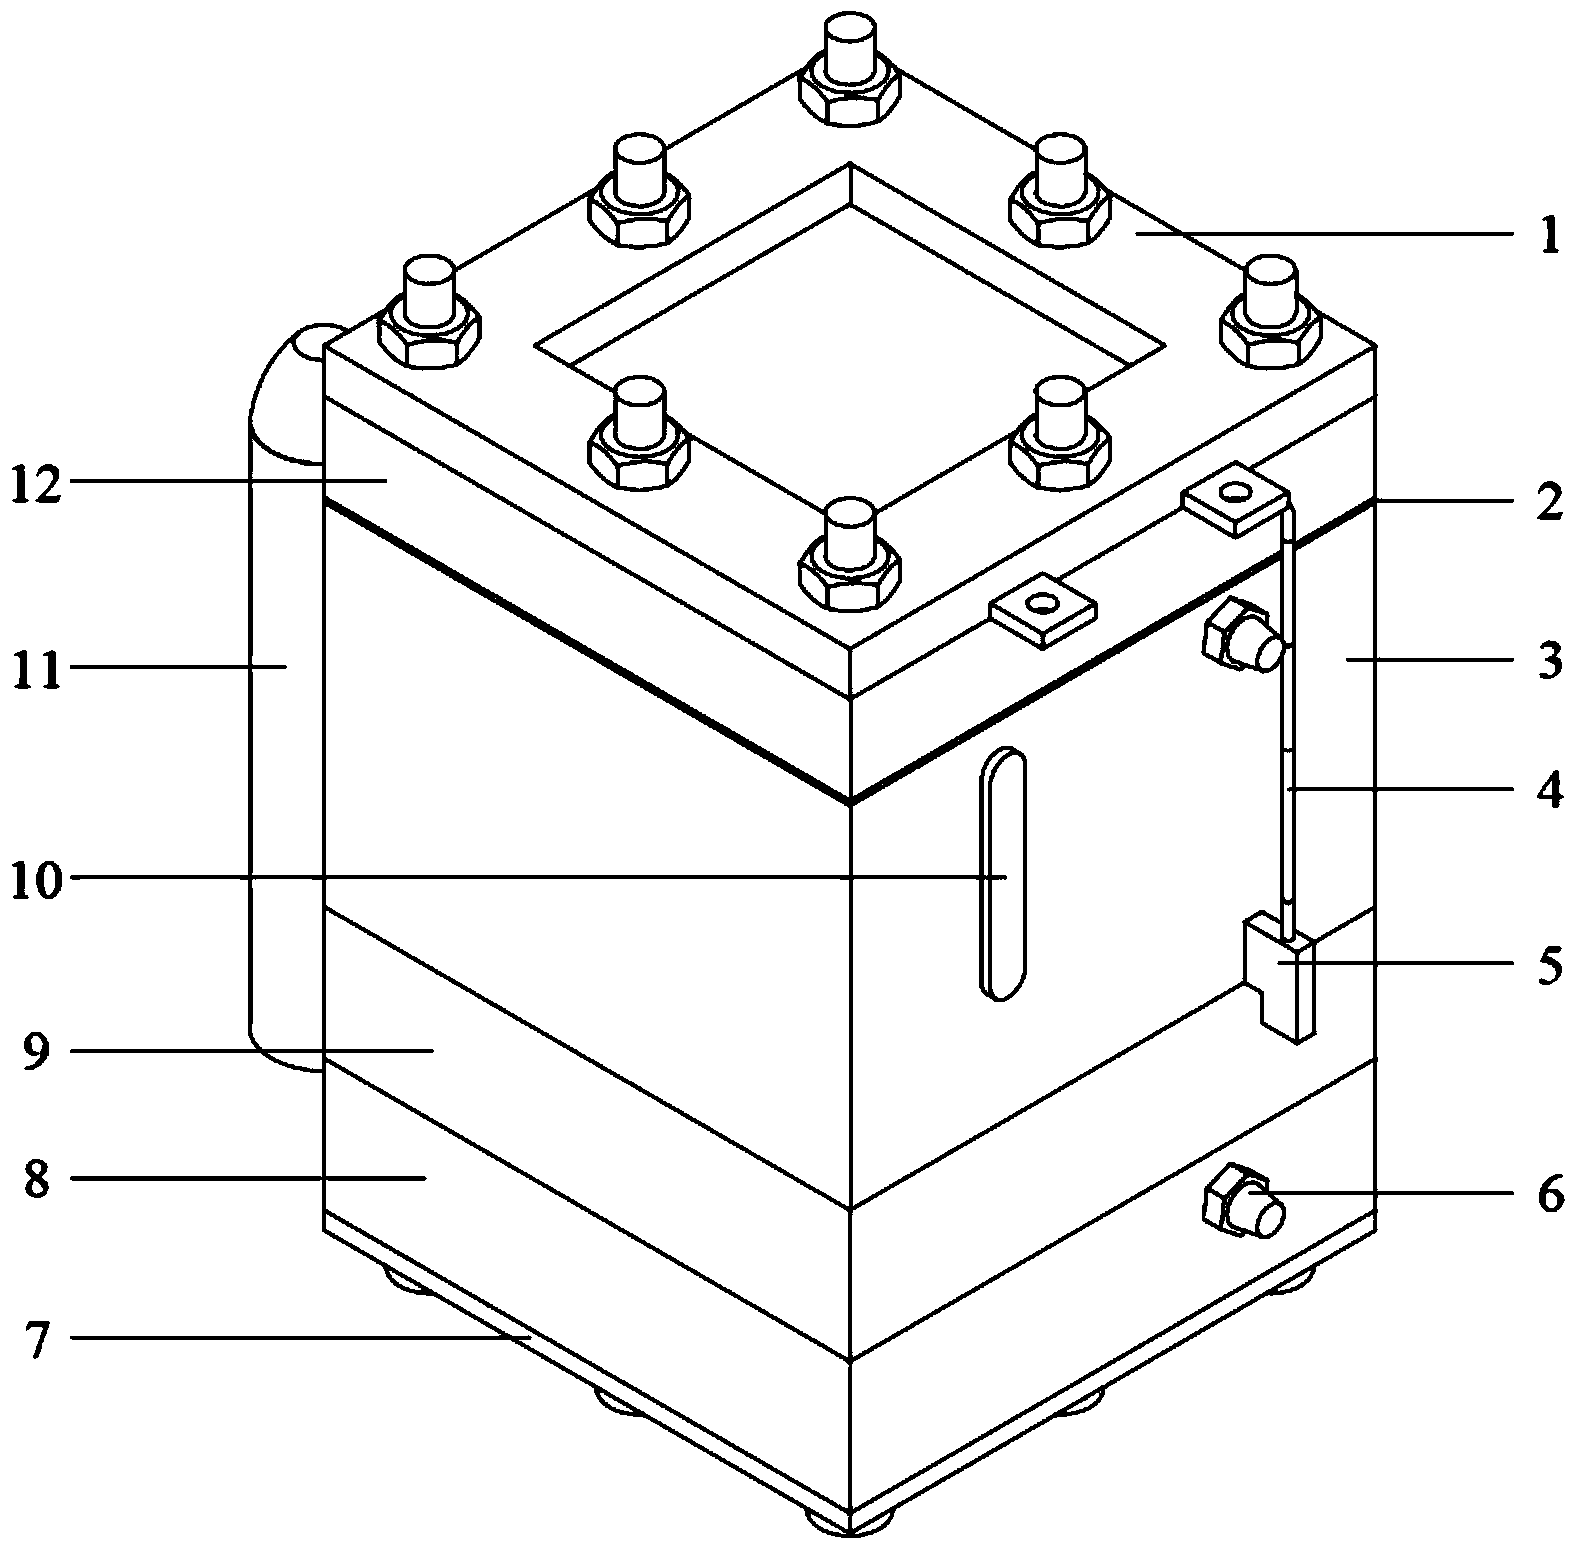 Steam supply passive type direct methanol fuel cell with catalytic combustion type heat supplying